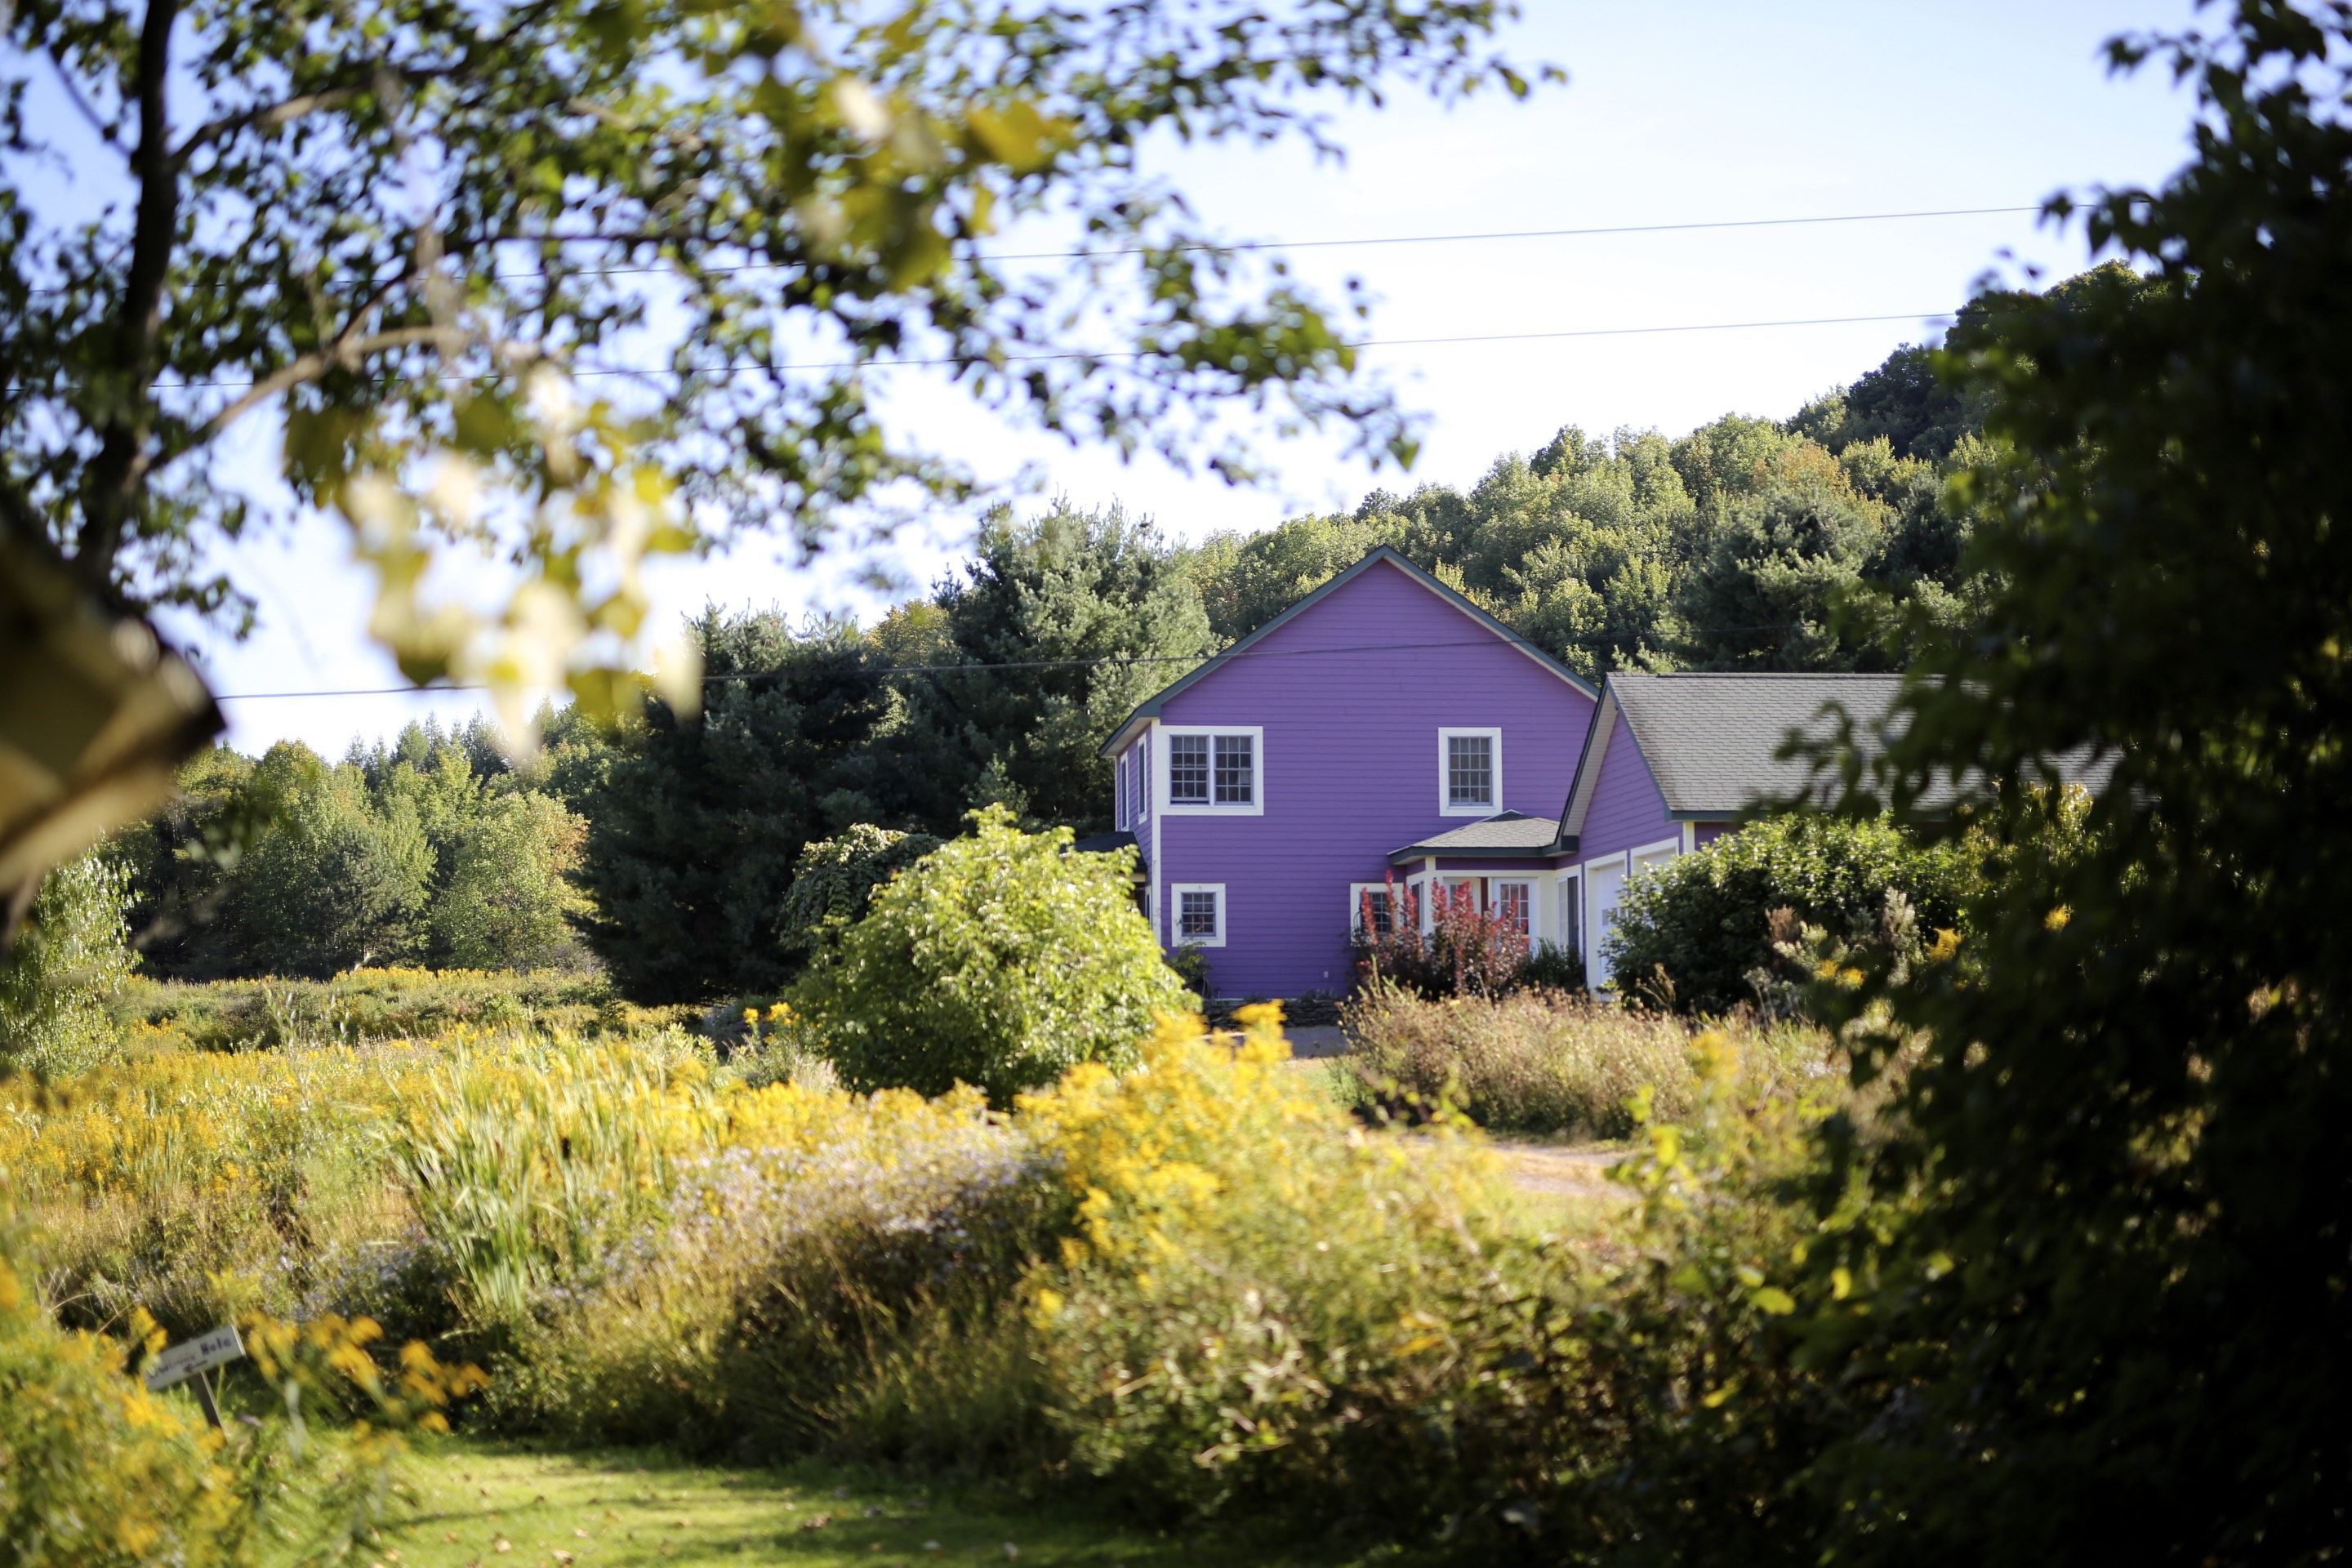 purple house in country setting